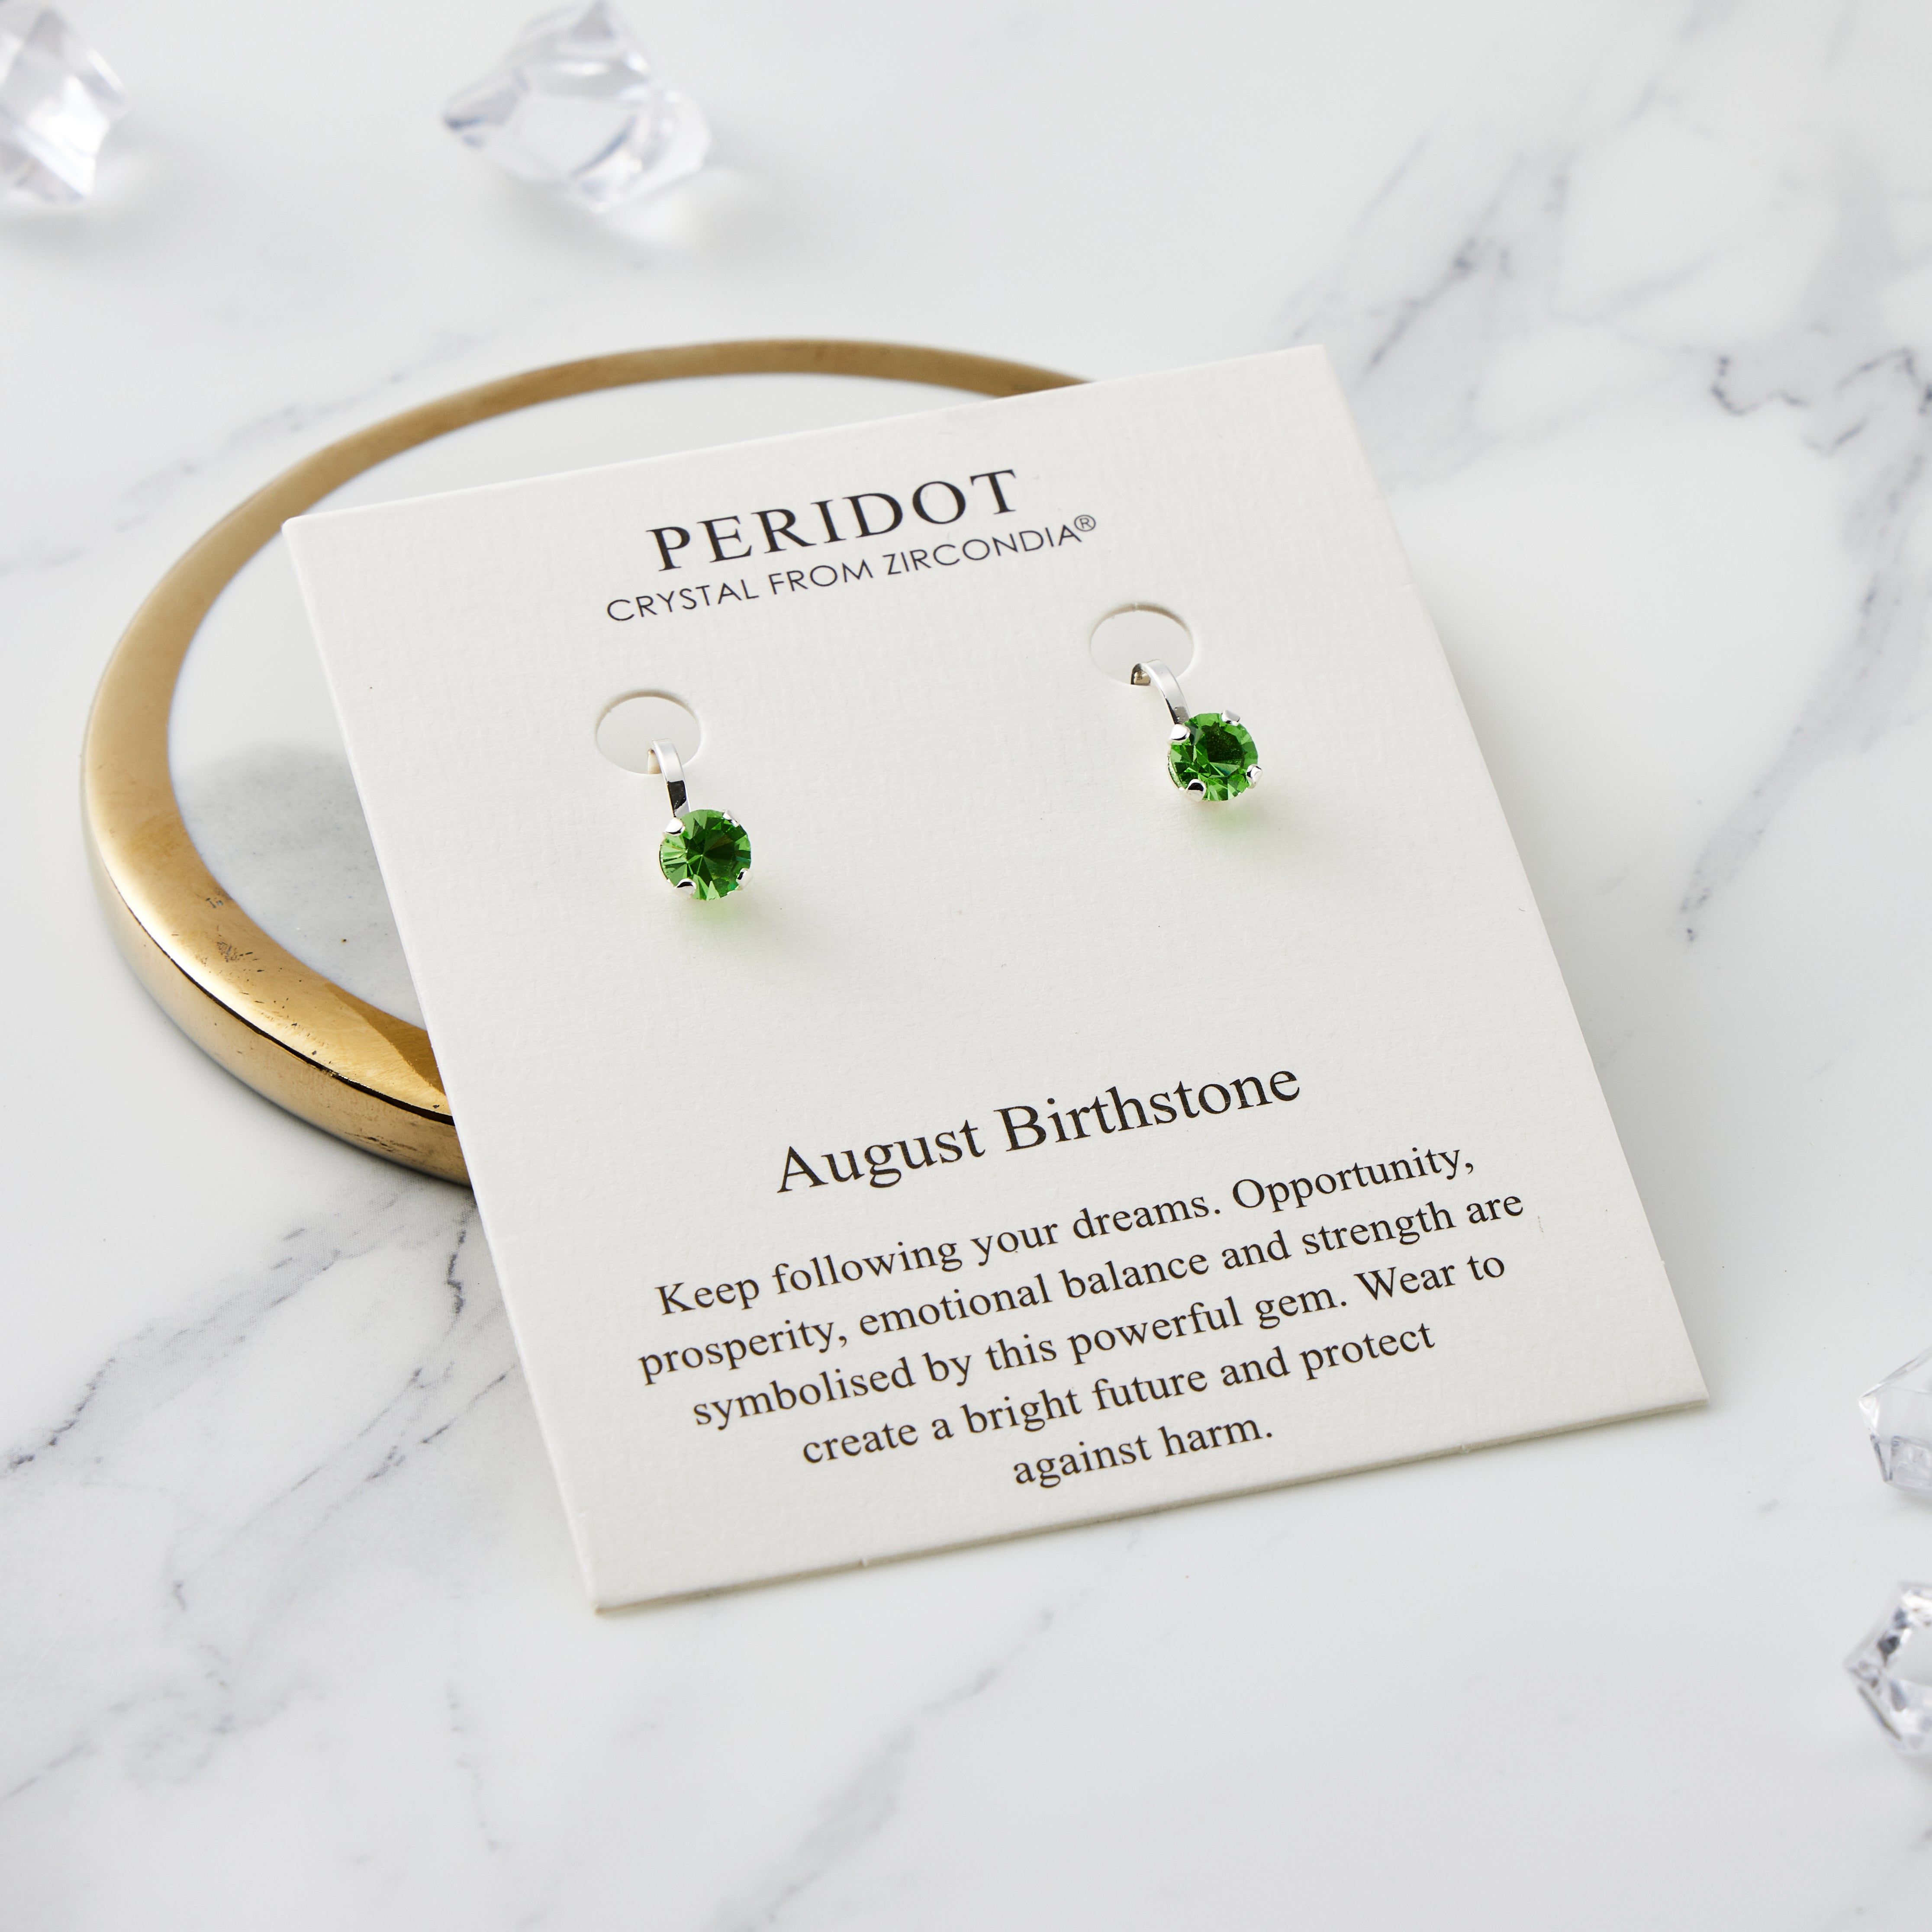 August (Peridot) Birthstone Clip On Earrings Created with Zircondia® Crystals